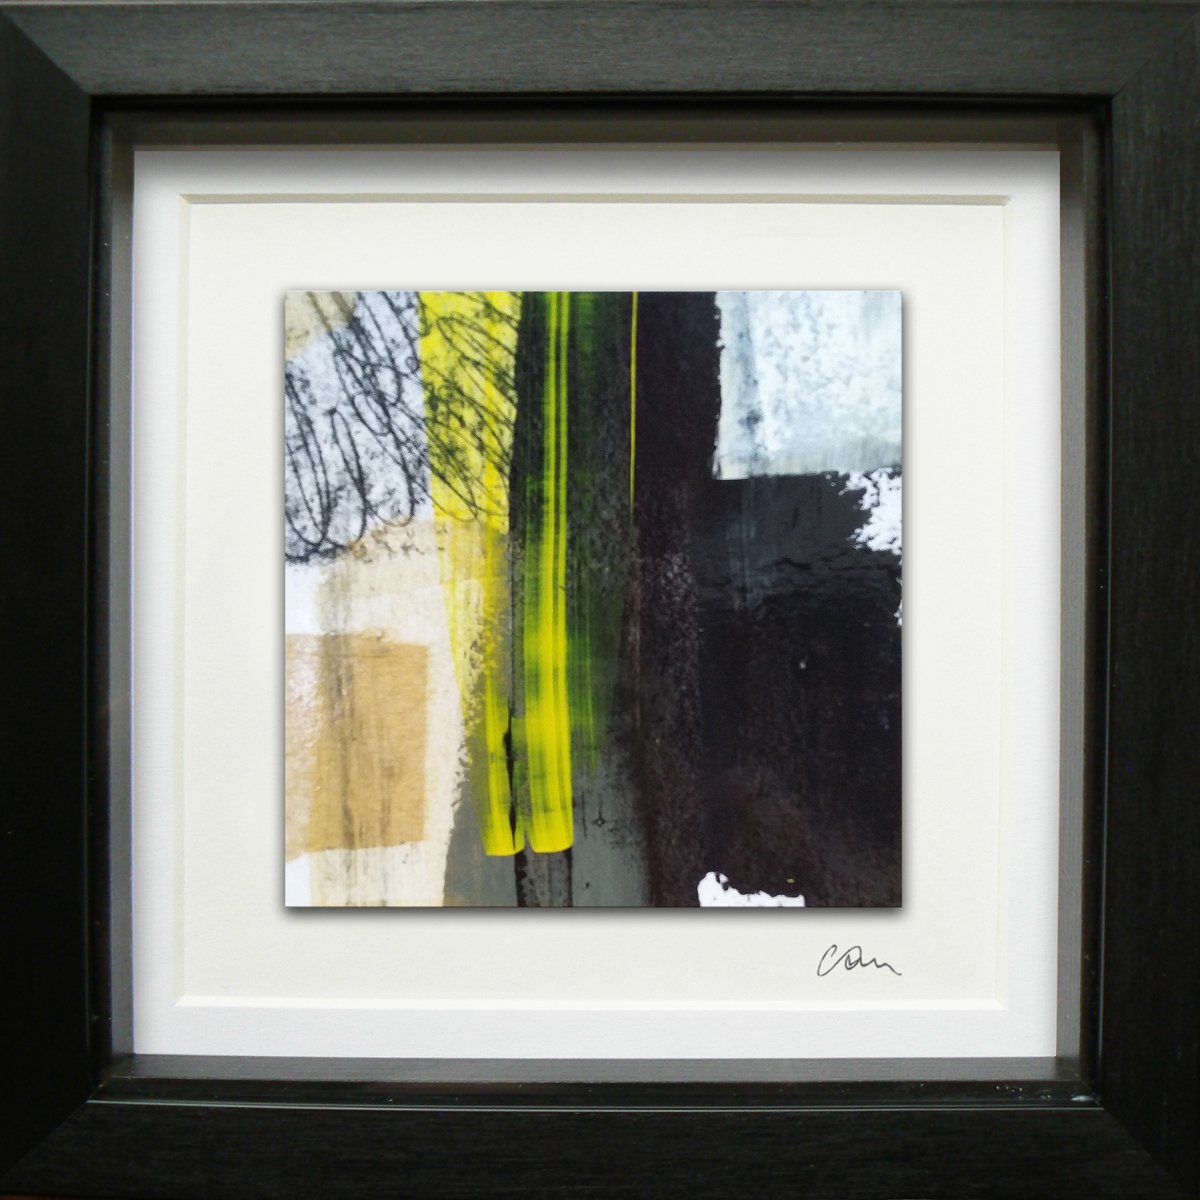 Framed ready to hang original abstract - Untold #2 by Carolynne Coulson